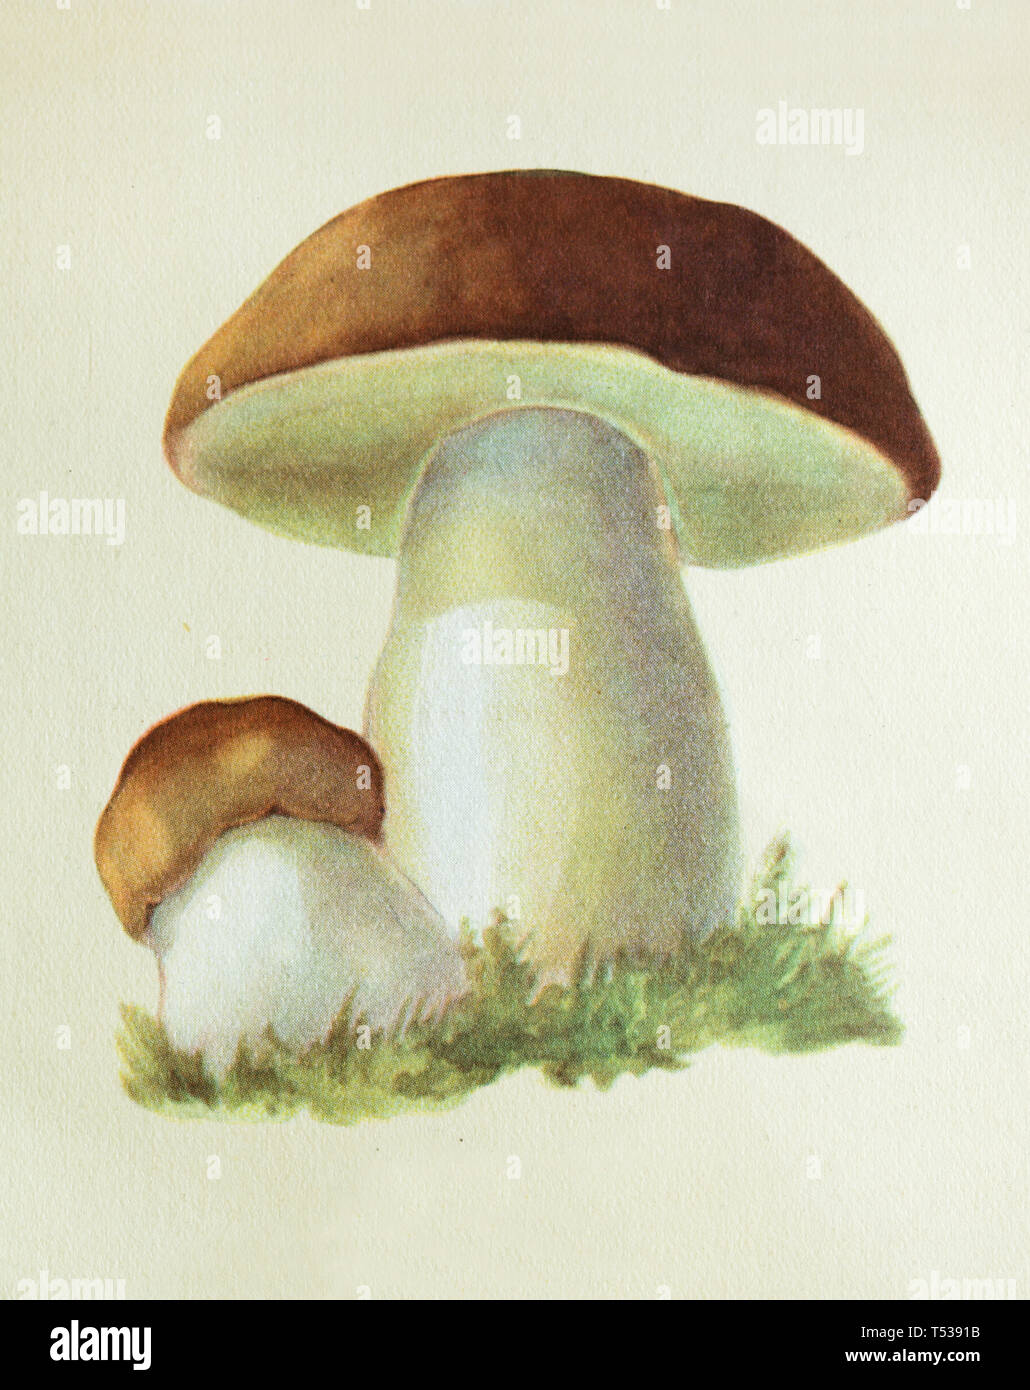 Bolete mushroom (Boletus edulis), also known as the cep or cepe depicted in the colour illustration in the Book of Tasty and Healthy Food published in the Soviet Union (1953). Stock Photo